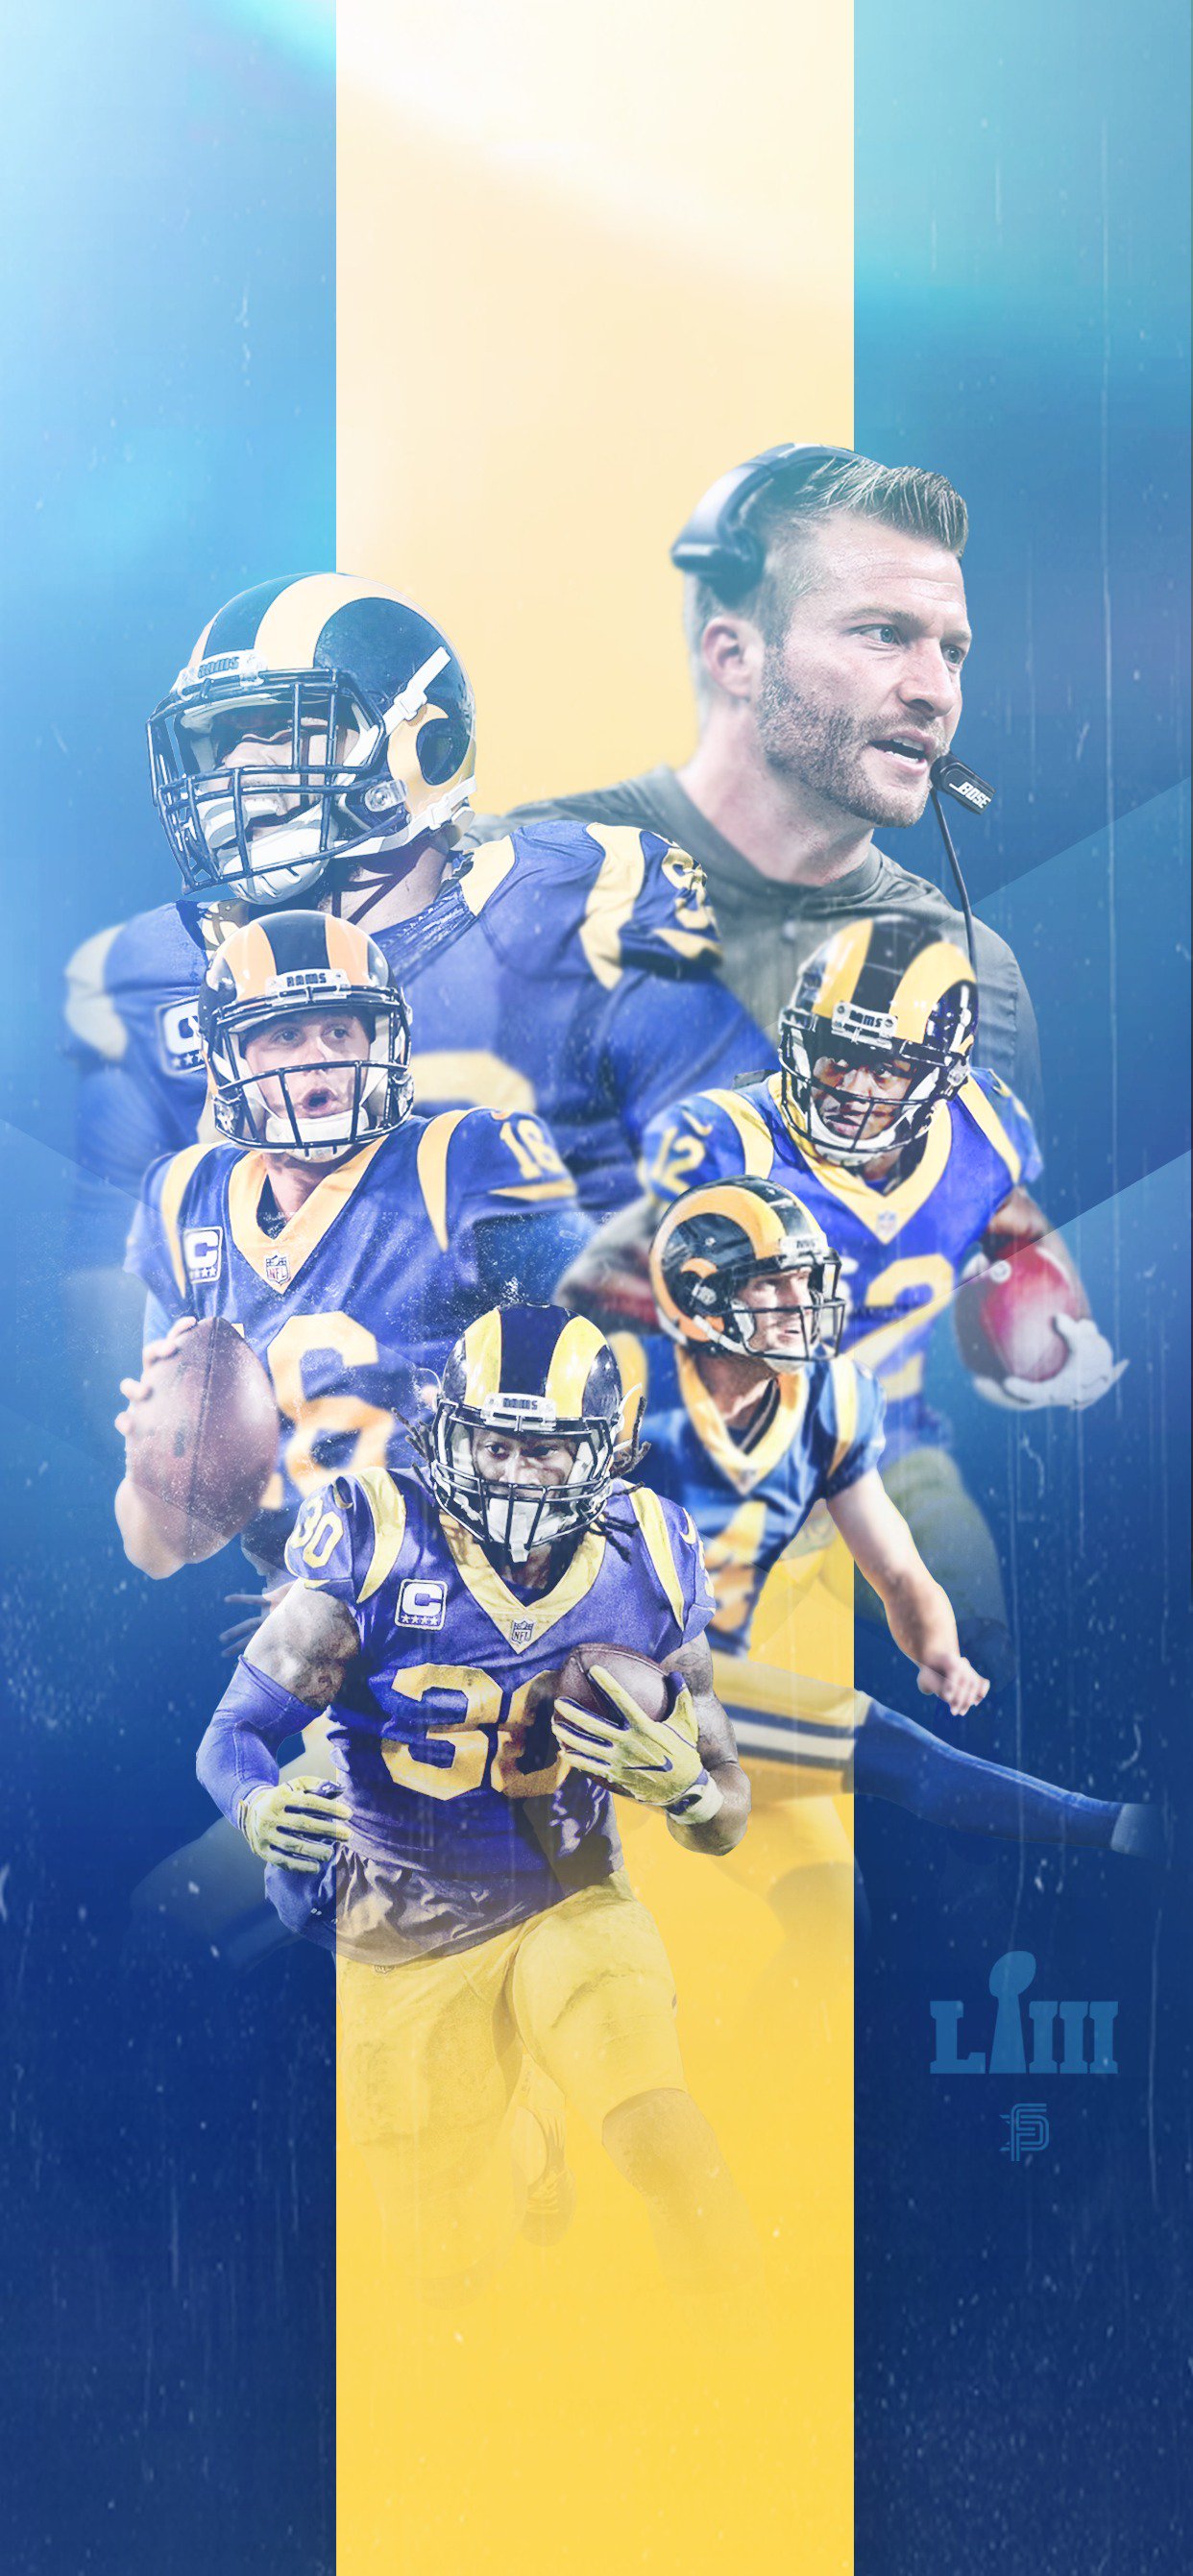 Ferry Phone Wallpaper Superbowl Sunday! Wish I Could Be Celebrating Today In St.Louis, But Regardless Of What That Toupee Wearing Sleazebag Did Go Rams! Lmk If You End Up Using